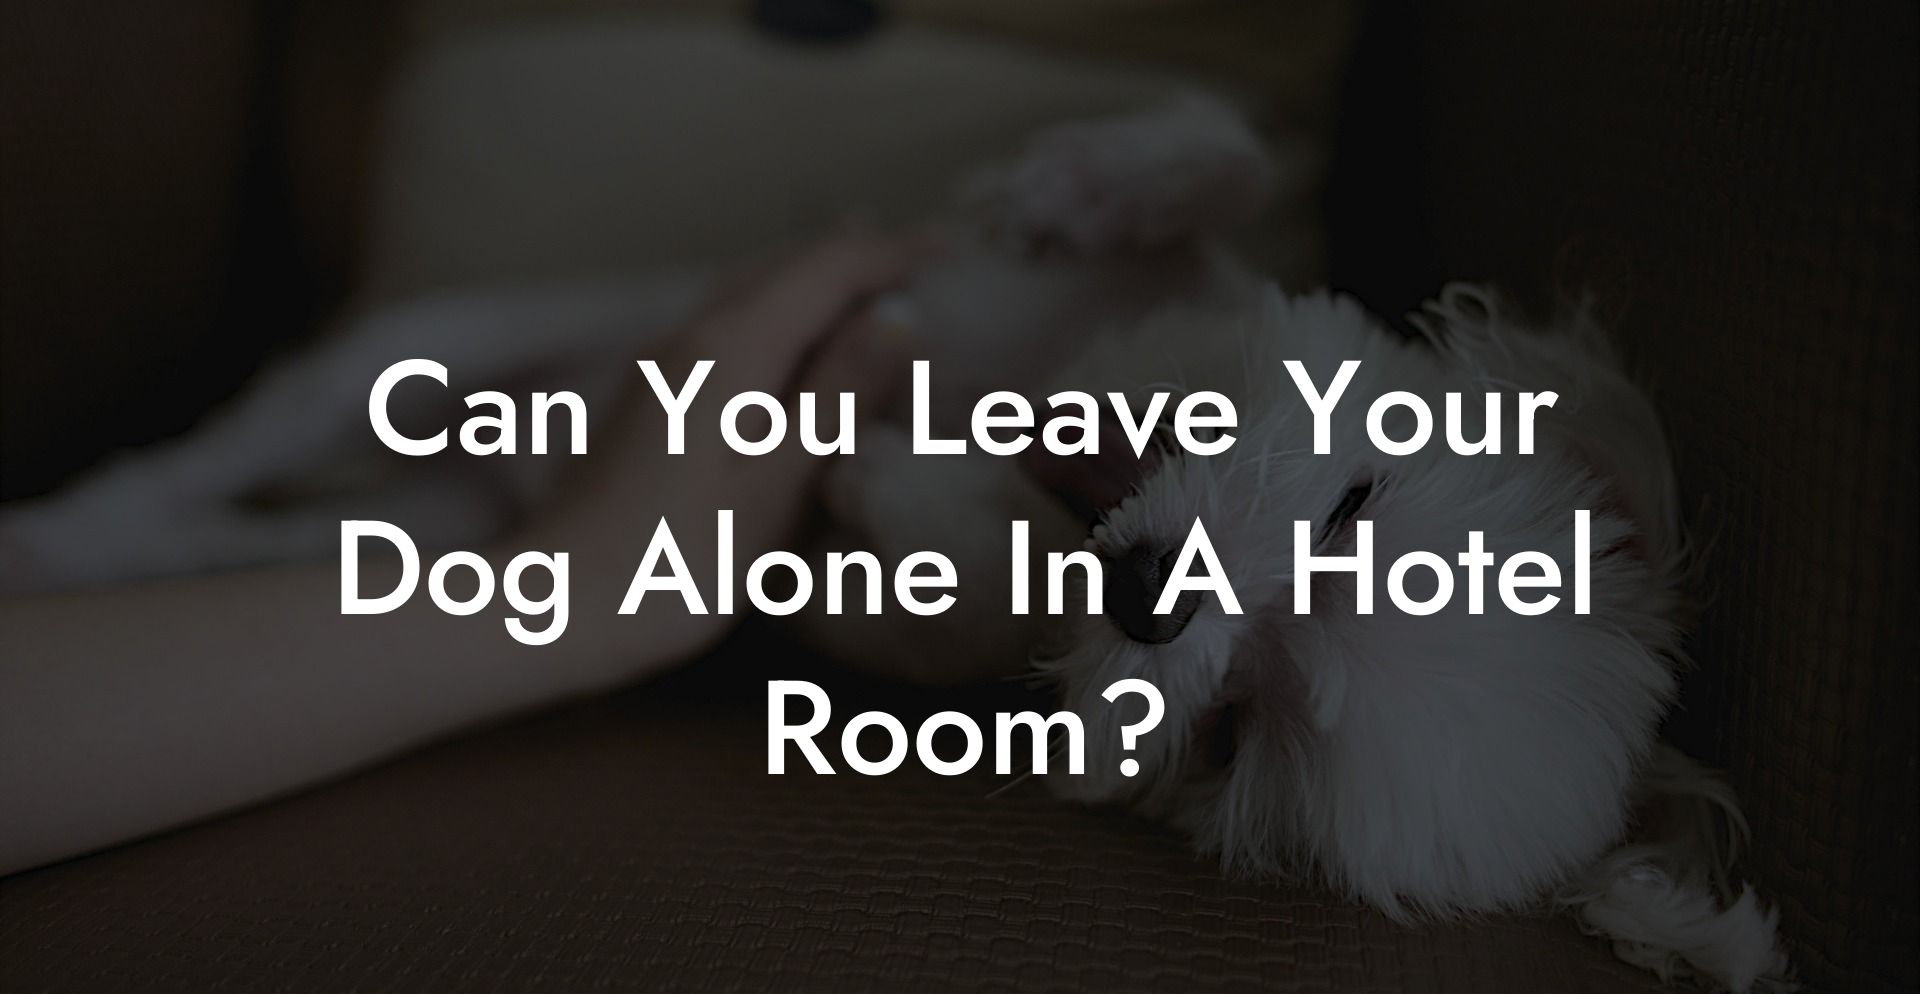 Can You Leave Your Dog Alone In A Hotel Room?